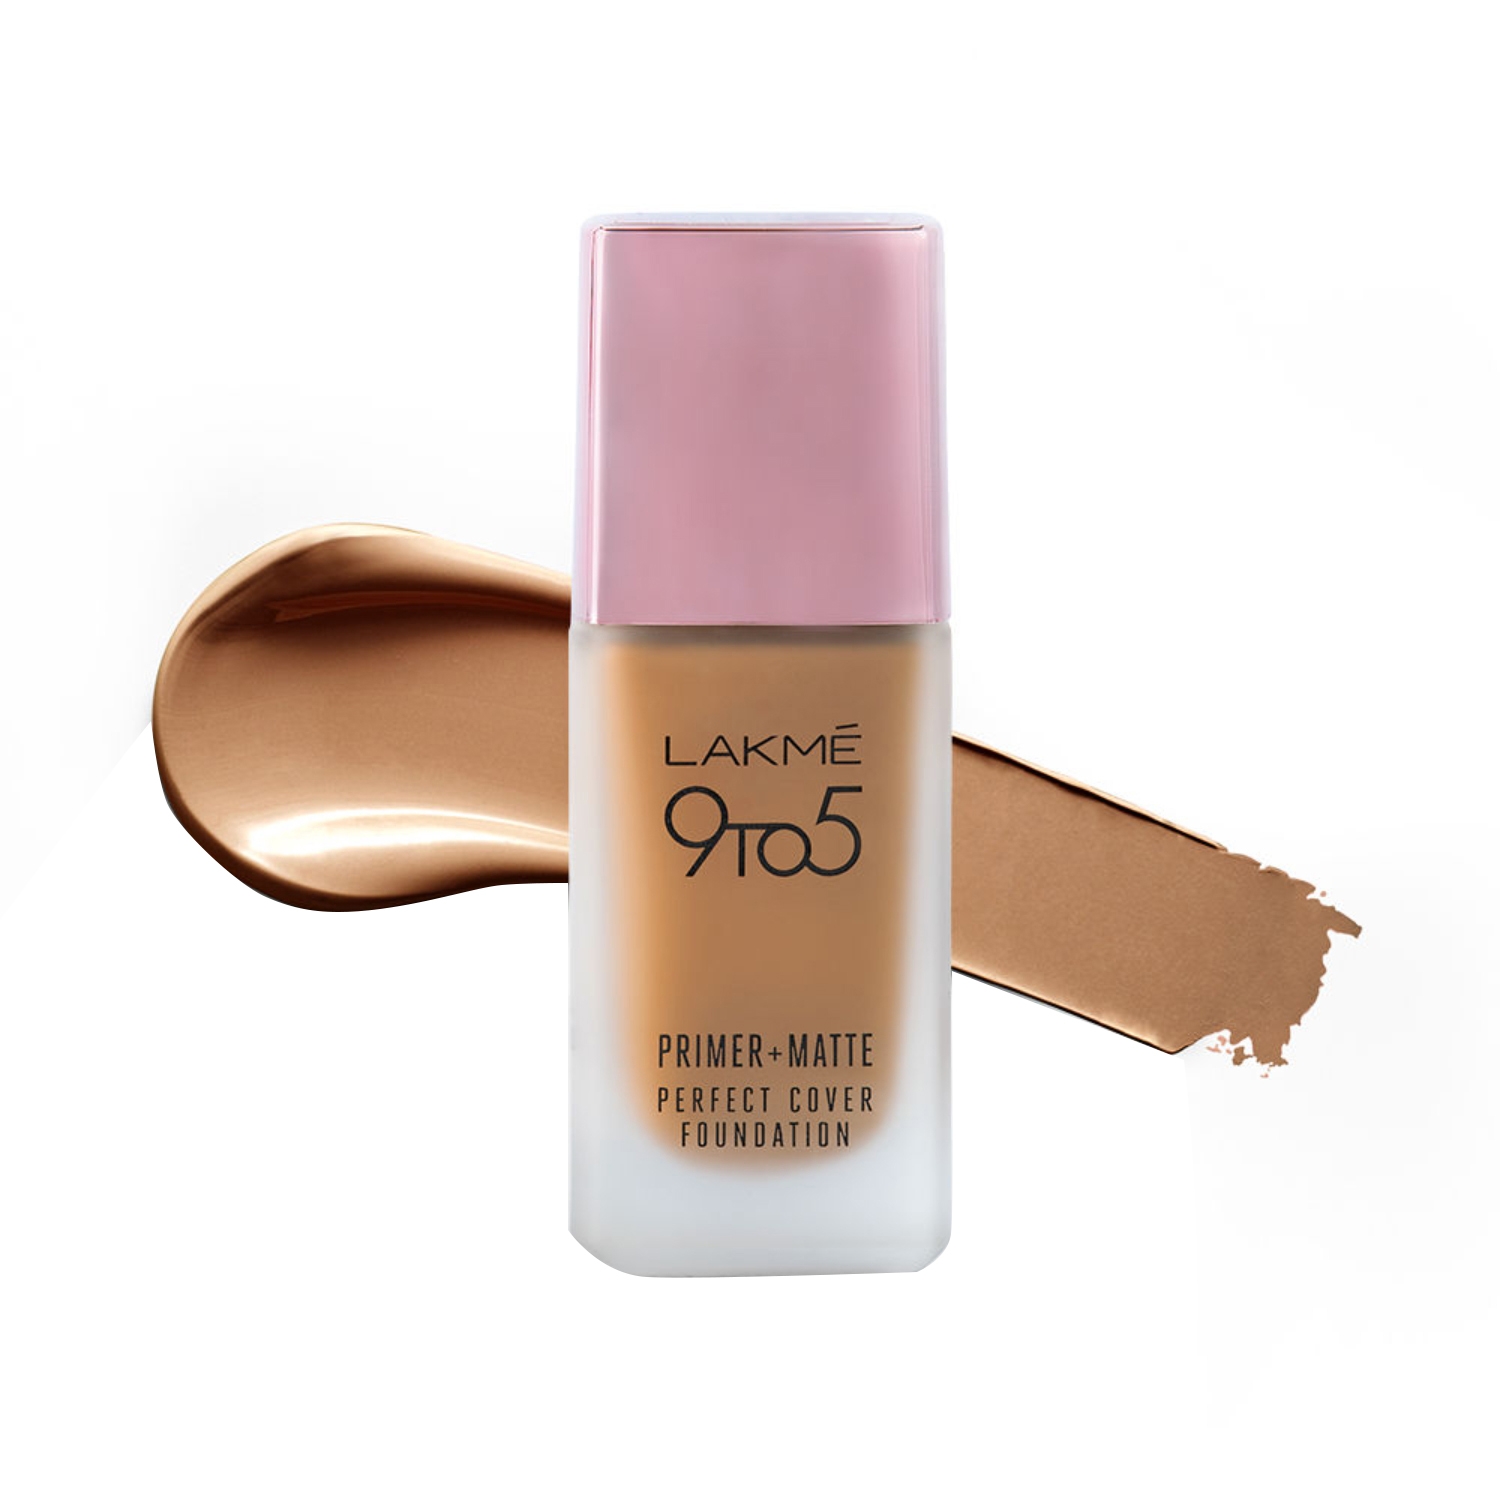 Lakme | Lakme 9 To 5 Primer + Matte Perfect Cover Foundation - N360 Neutral Chestnut (25ml)